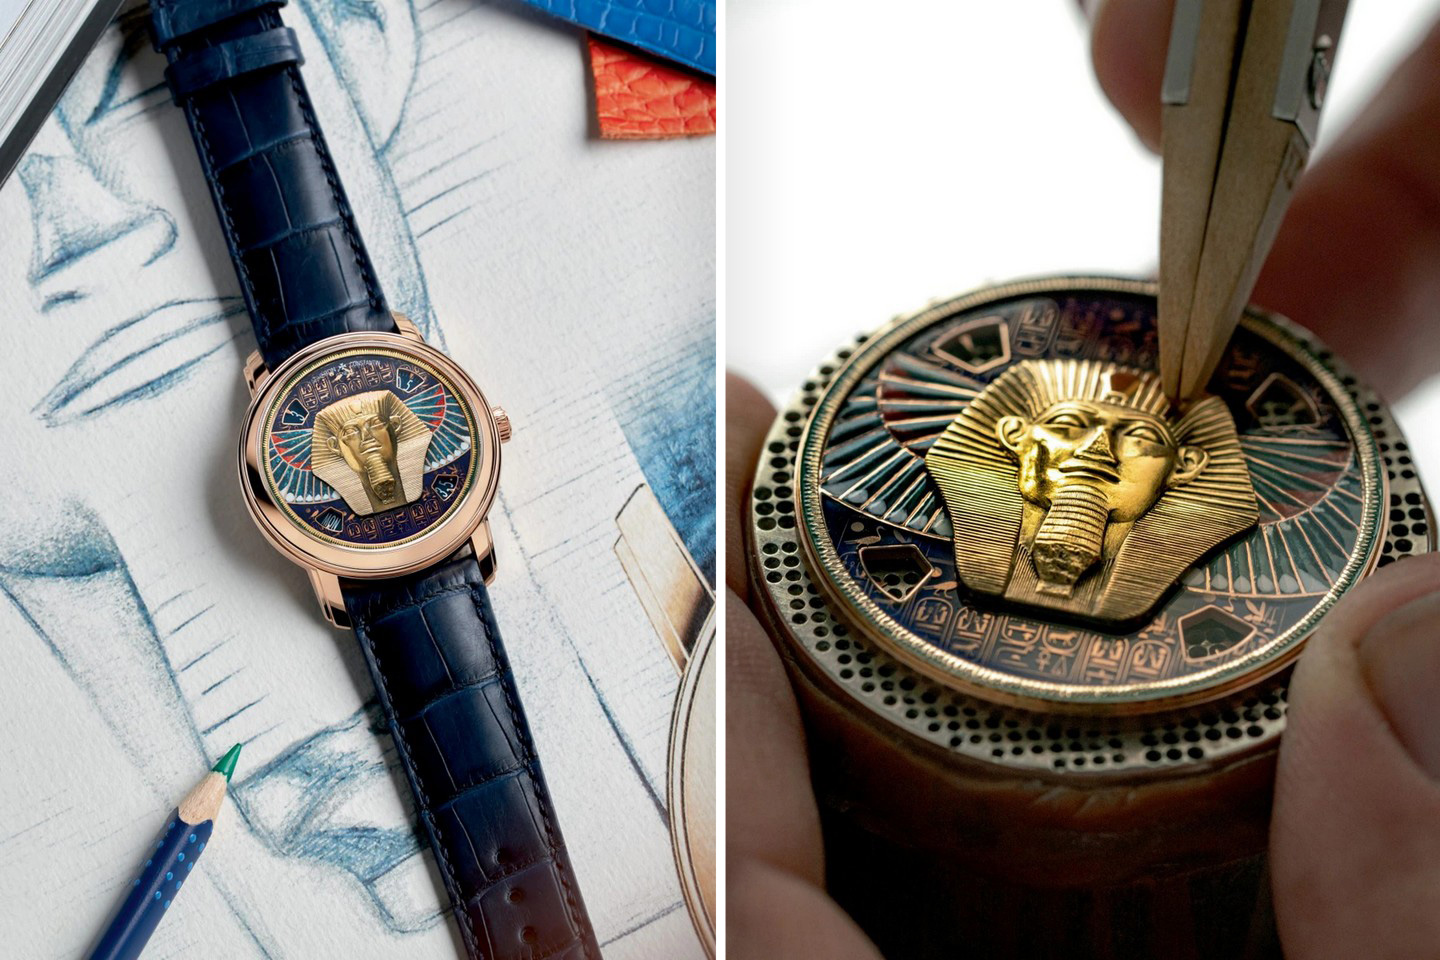 #The Louvre collaborated with luxury watchmaker Vacheron Constantin to create 4 historic timepieces